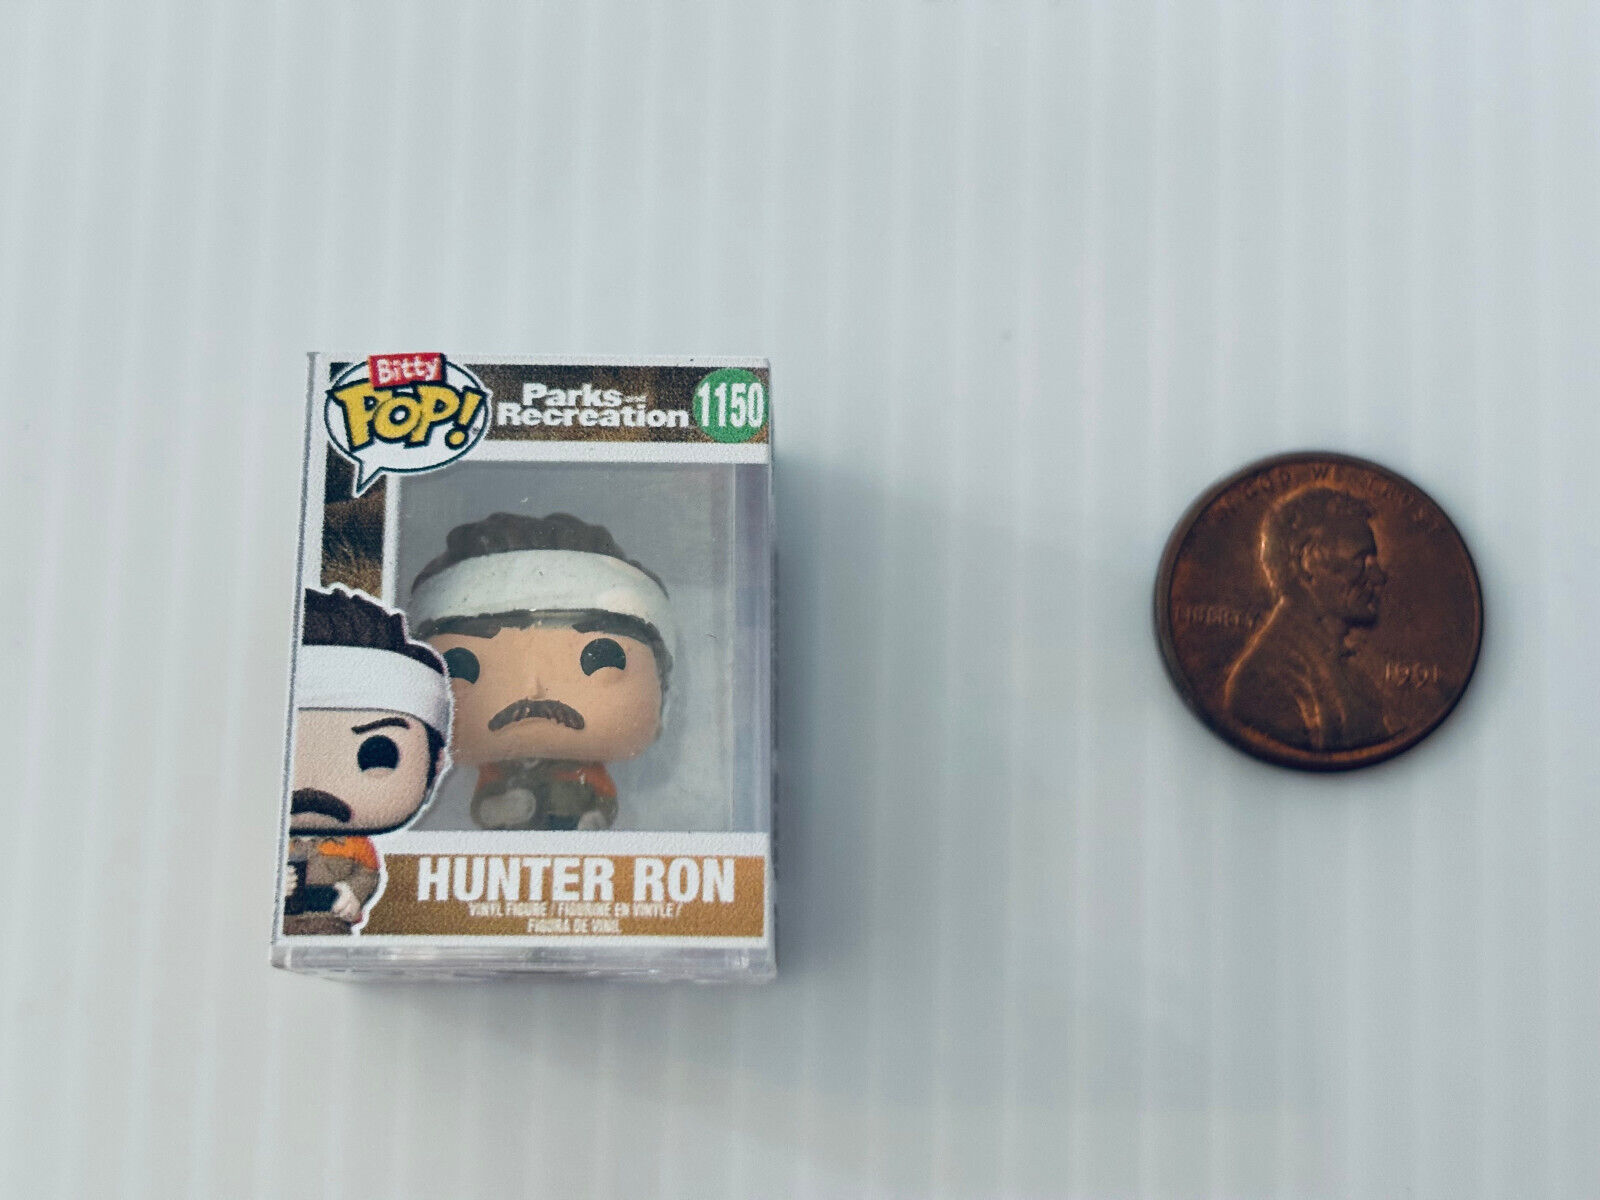 Funko Bitty Pop - Parks and Recreation Series - Hunter Ron Chase - Some Wear